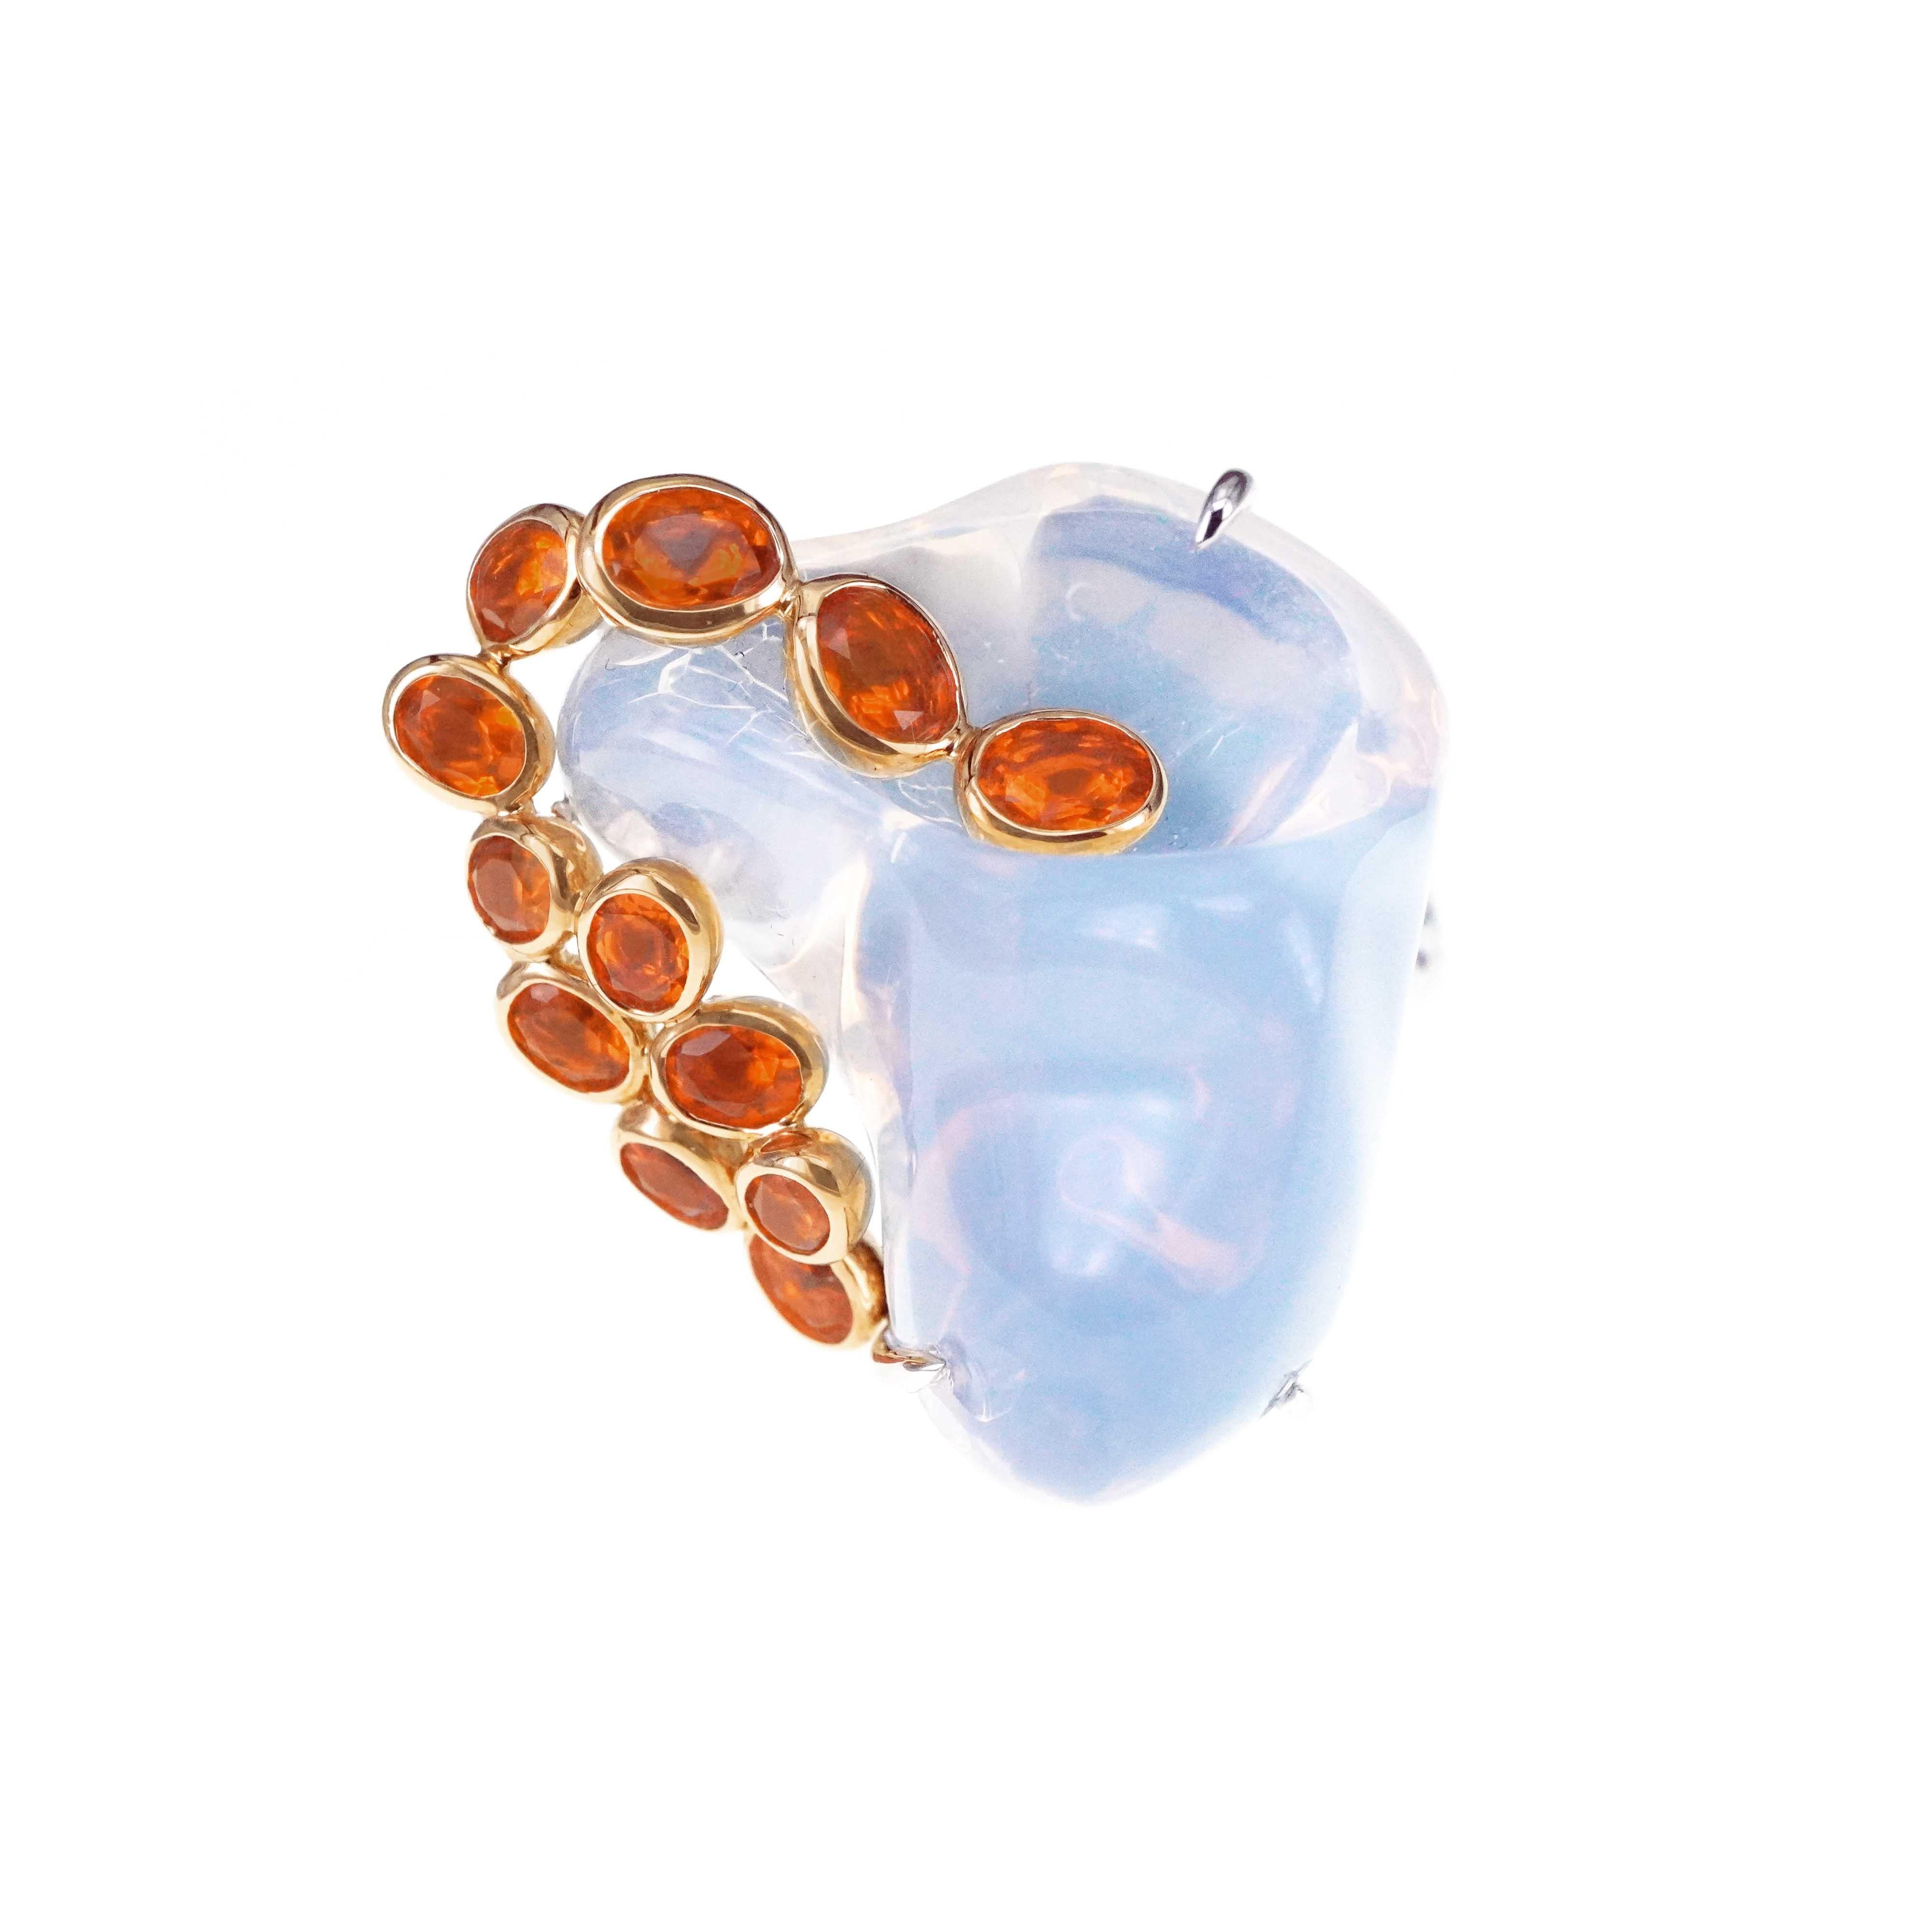 A 40.44 carat huge Mexican opal is set along with 1.64 carat of fiery orange Mexican fire opal and 0.29 carat of white round brilliant diamond.  The ring is one of a kind as the 40.44 carat Mexican opal shape is unique and difficult to find another